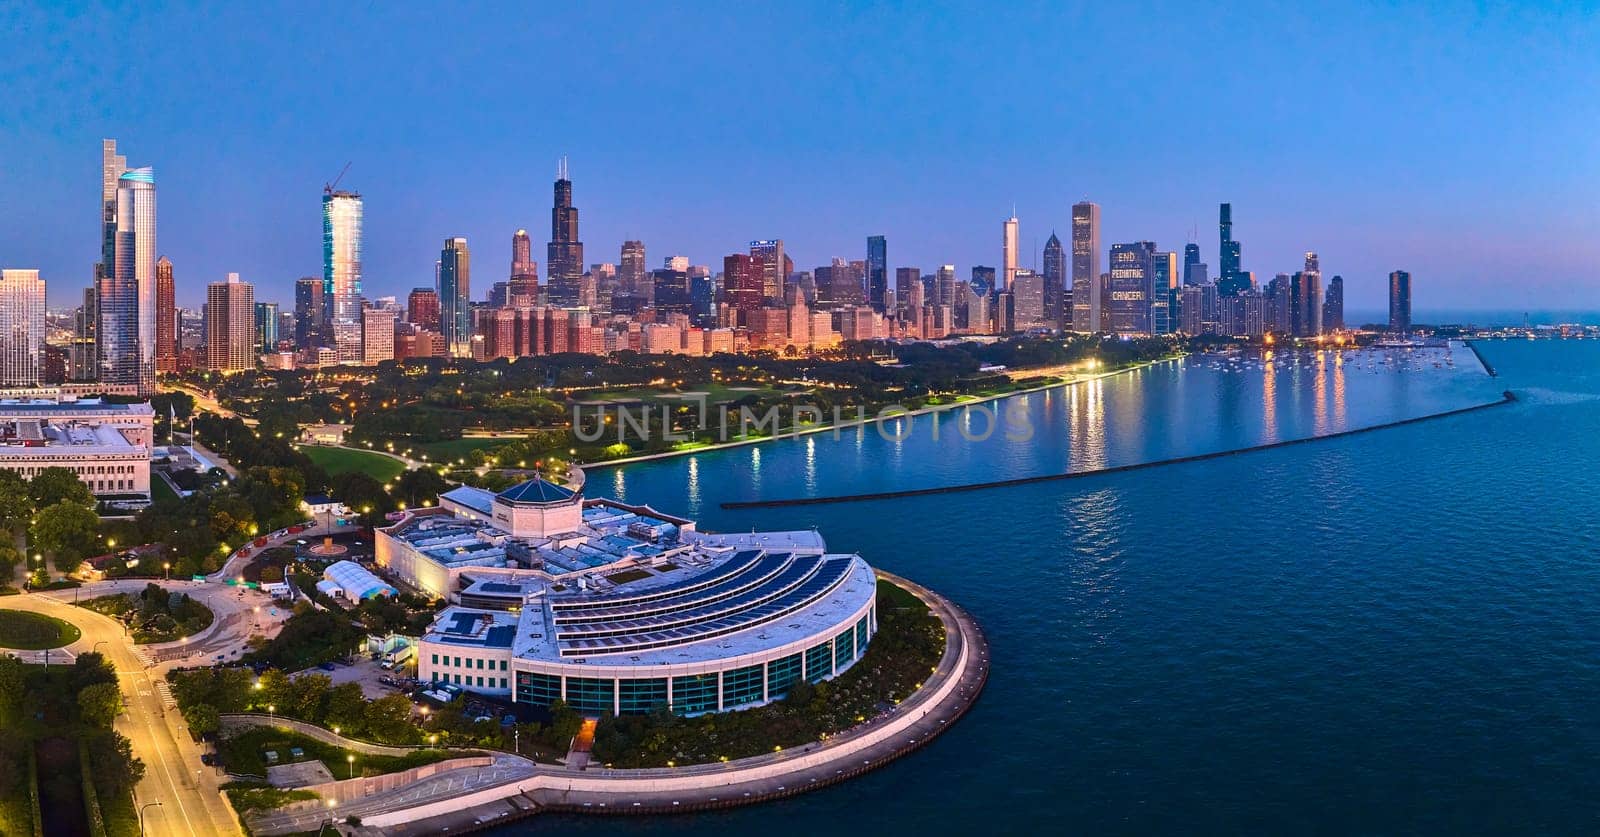 Vibrant Chicago skyline at dusk, featuring the iconic Willis Tower and Shedd Aquarium, captured by an aerial drone over Lake Michigan